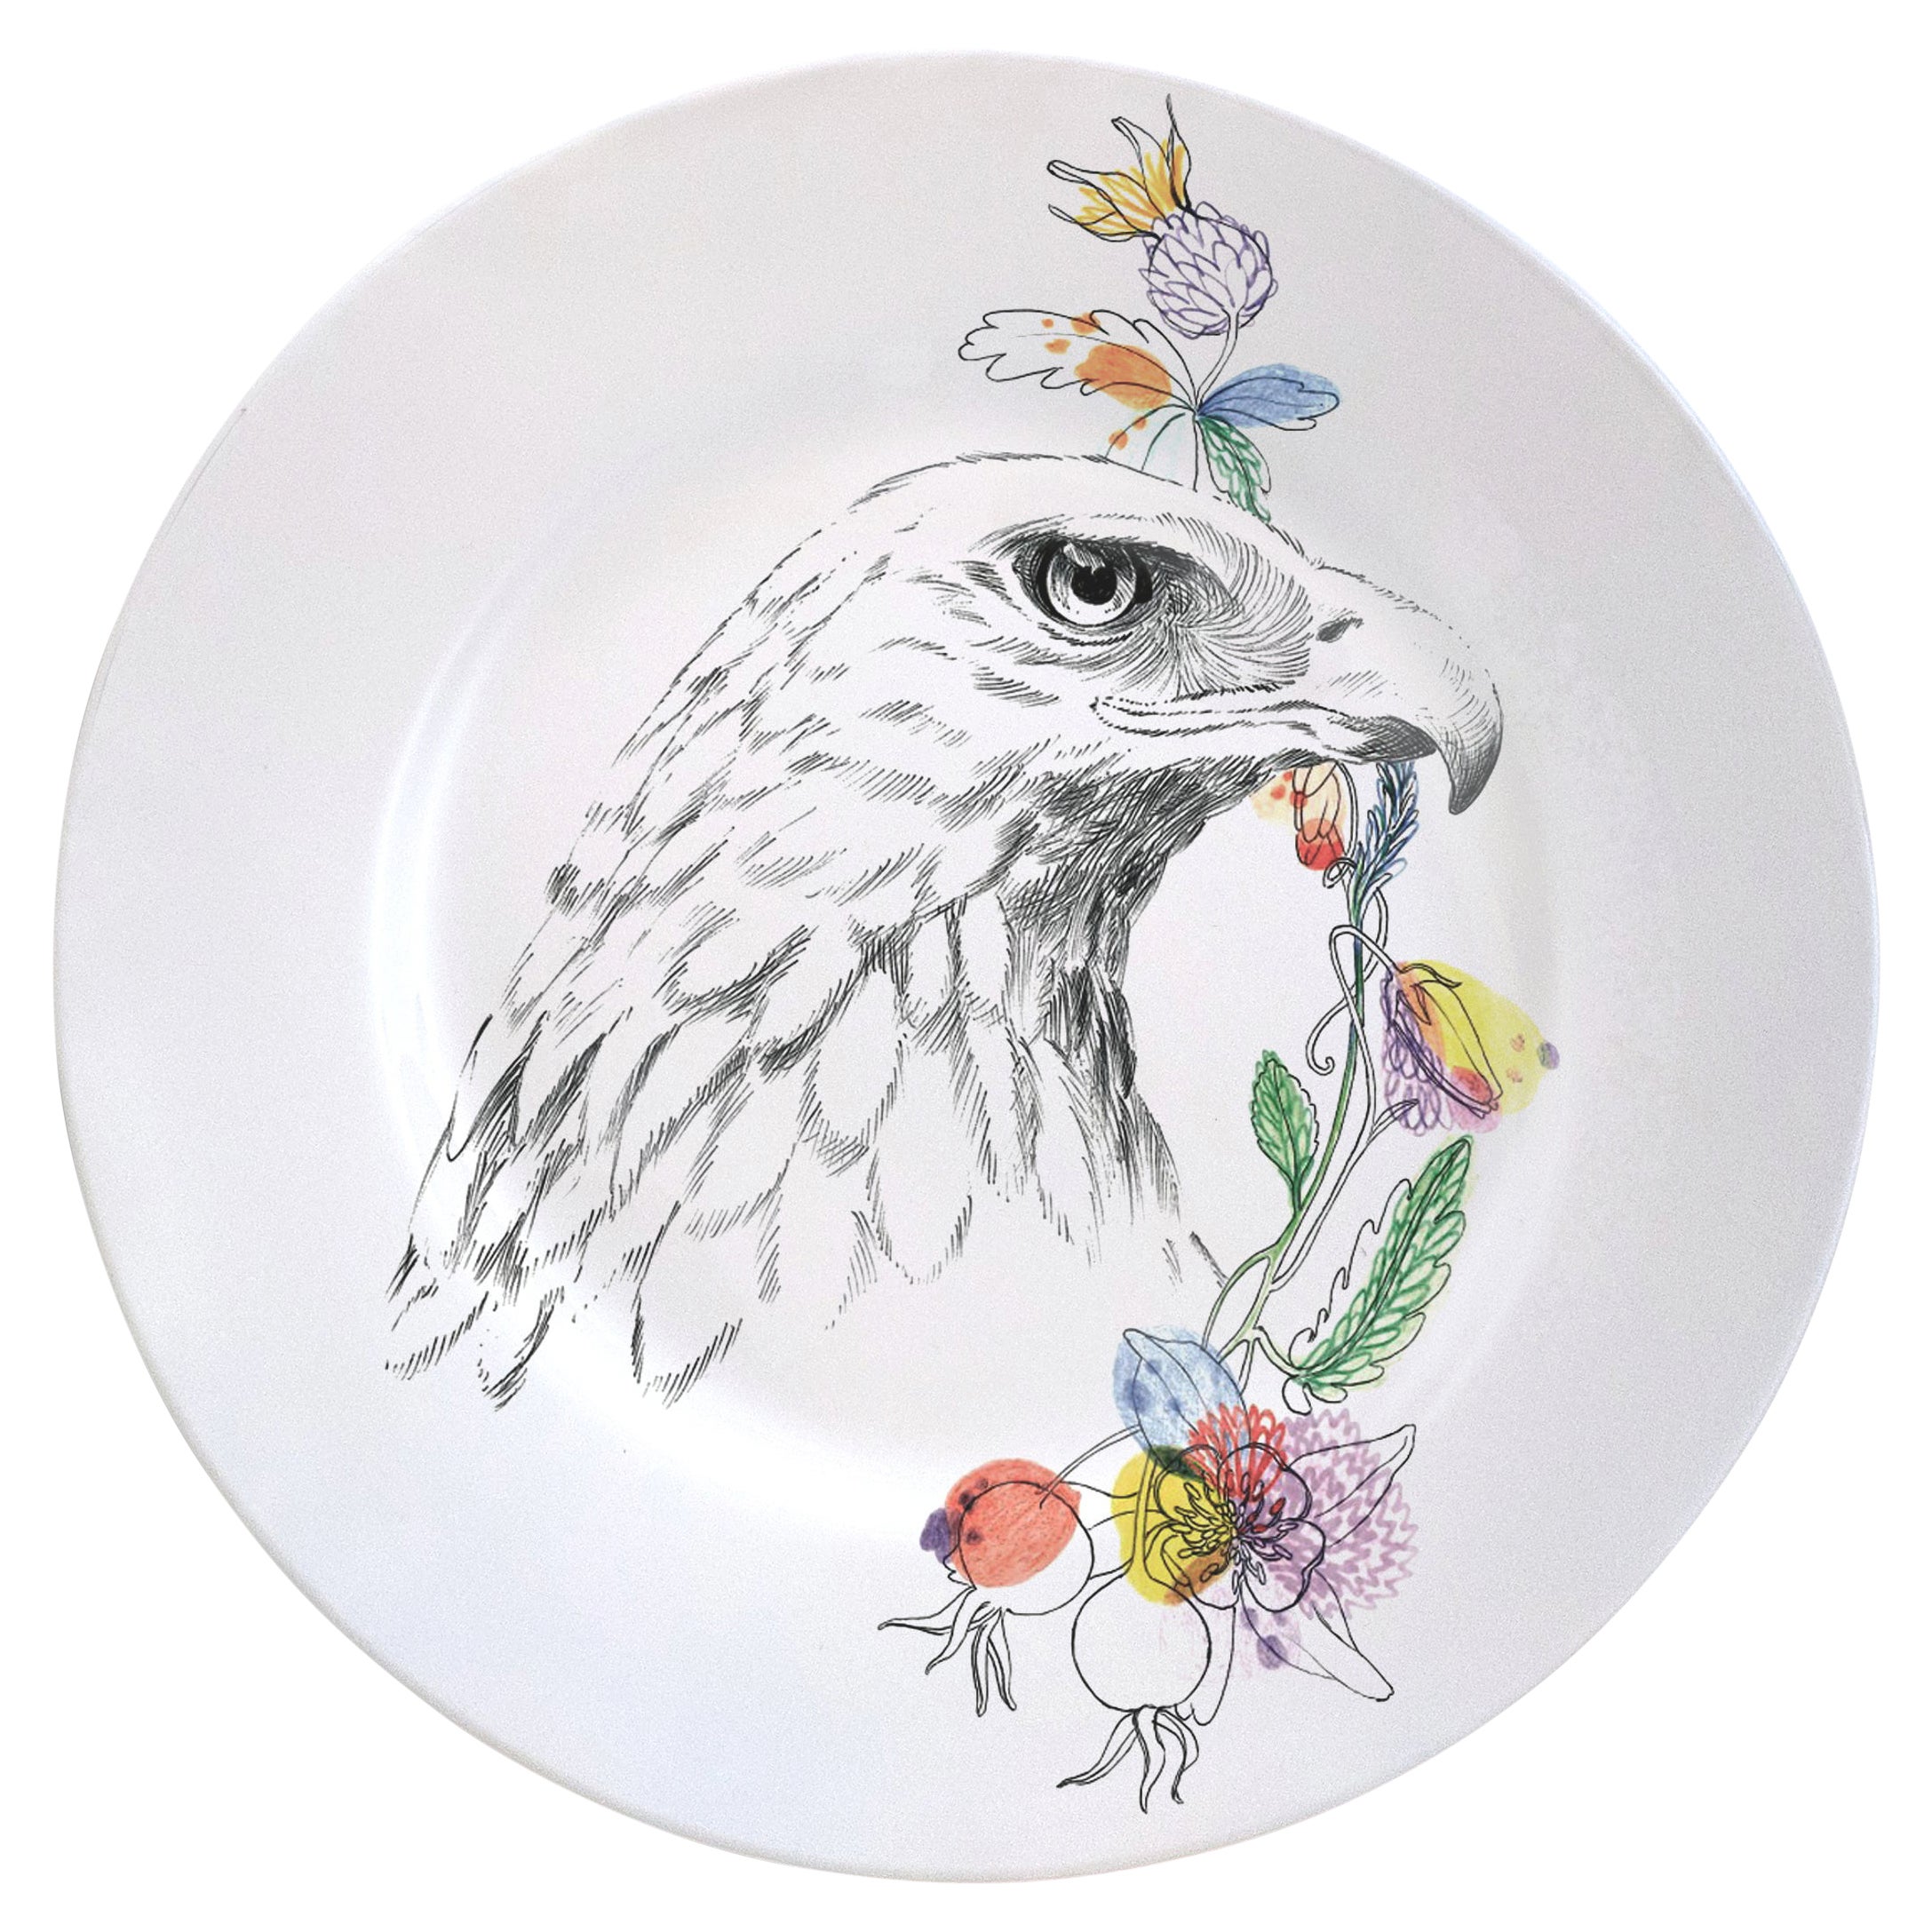 Ode to the Woods, Contemporary Porcelain Dinner Plate with Eagle and Flowers